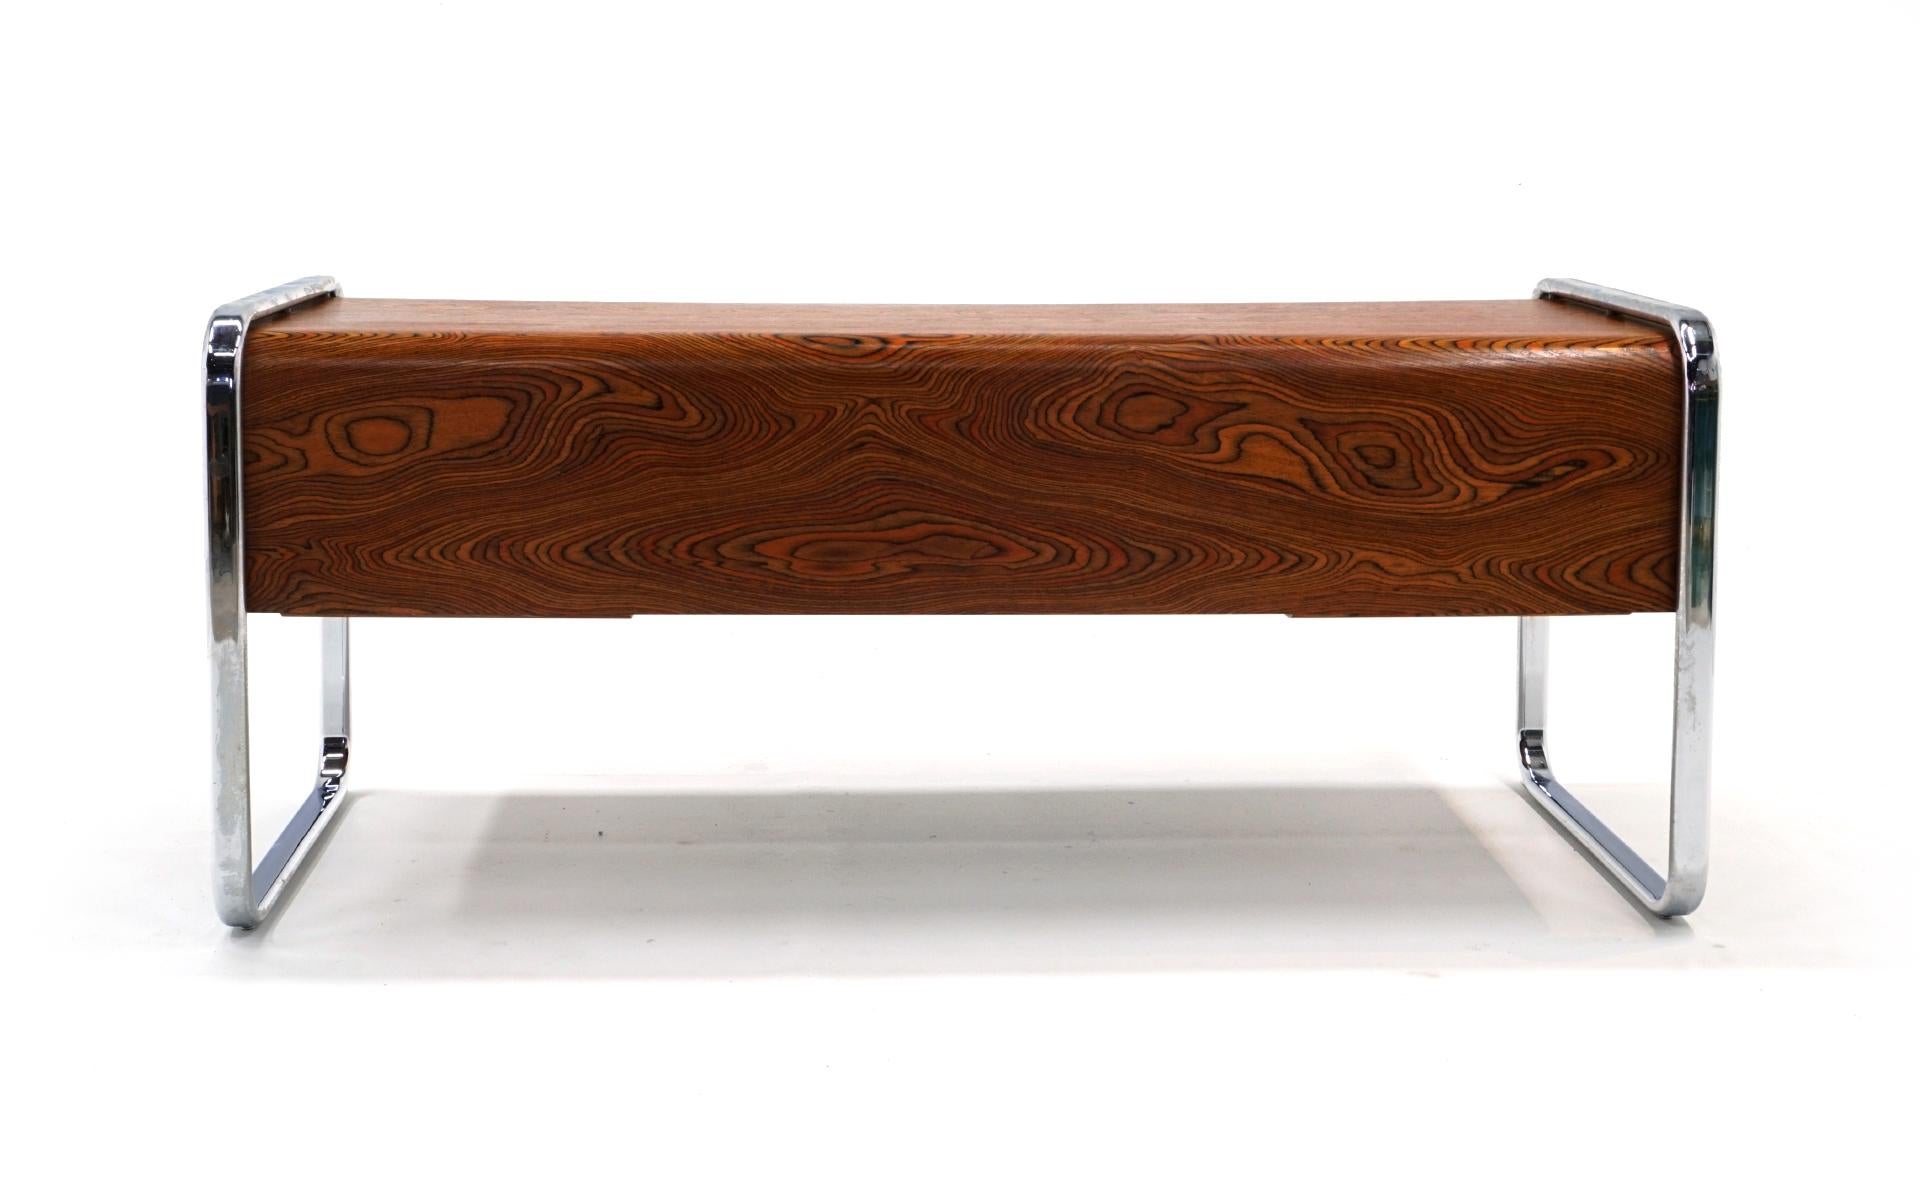 Peter Protzman desk designed in the 1970s and produced for only a short time due to production costs. The multi-color figuring in the zebra wood is absolutely stunning. Shockingly good original condition. Virtually no scratches on the desk, light